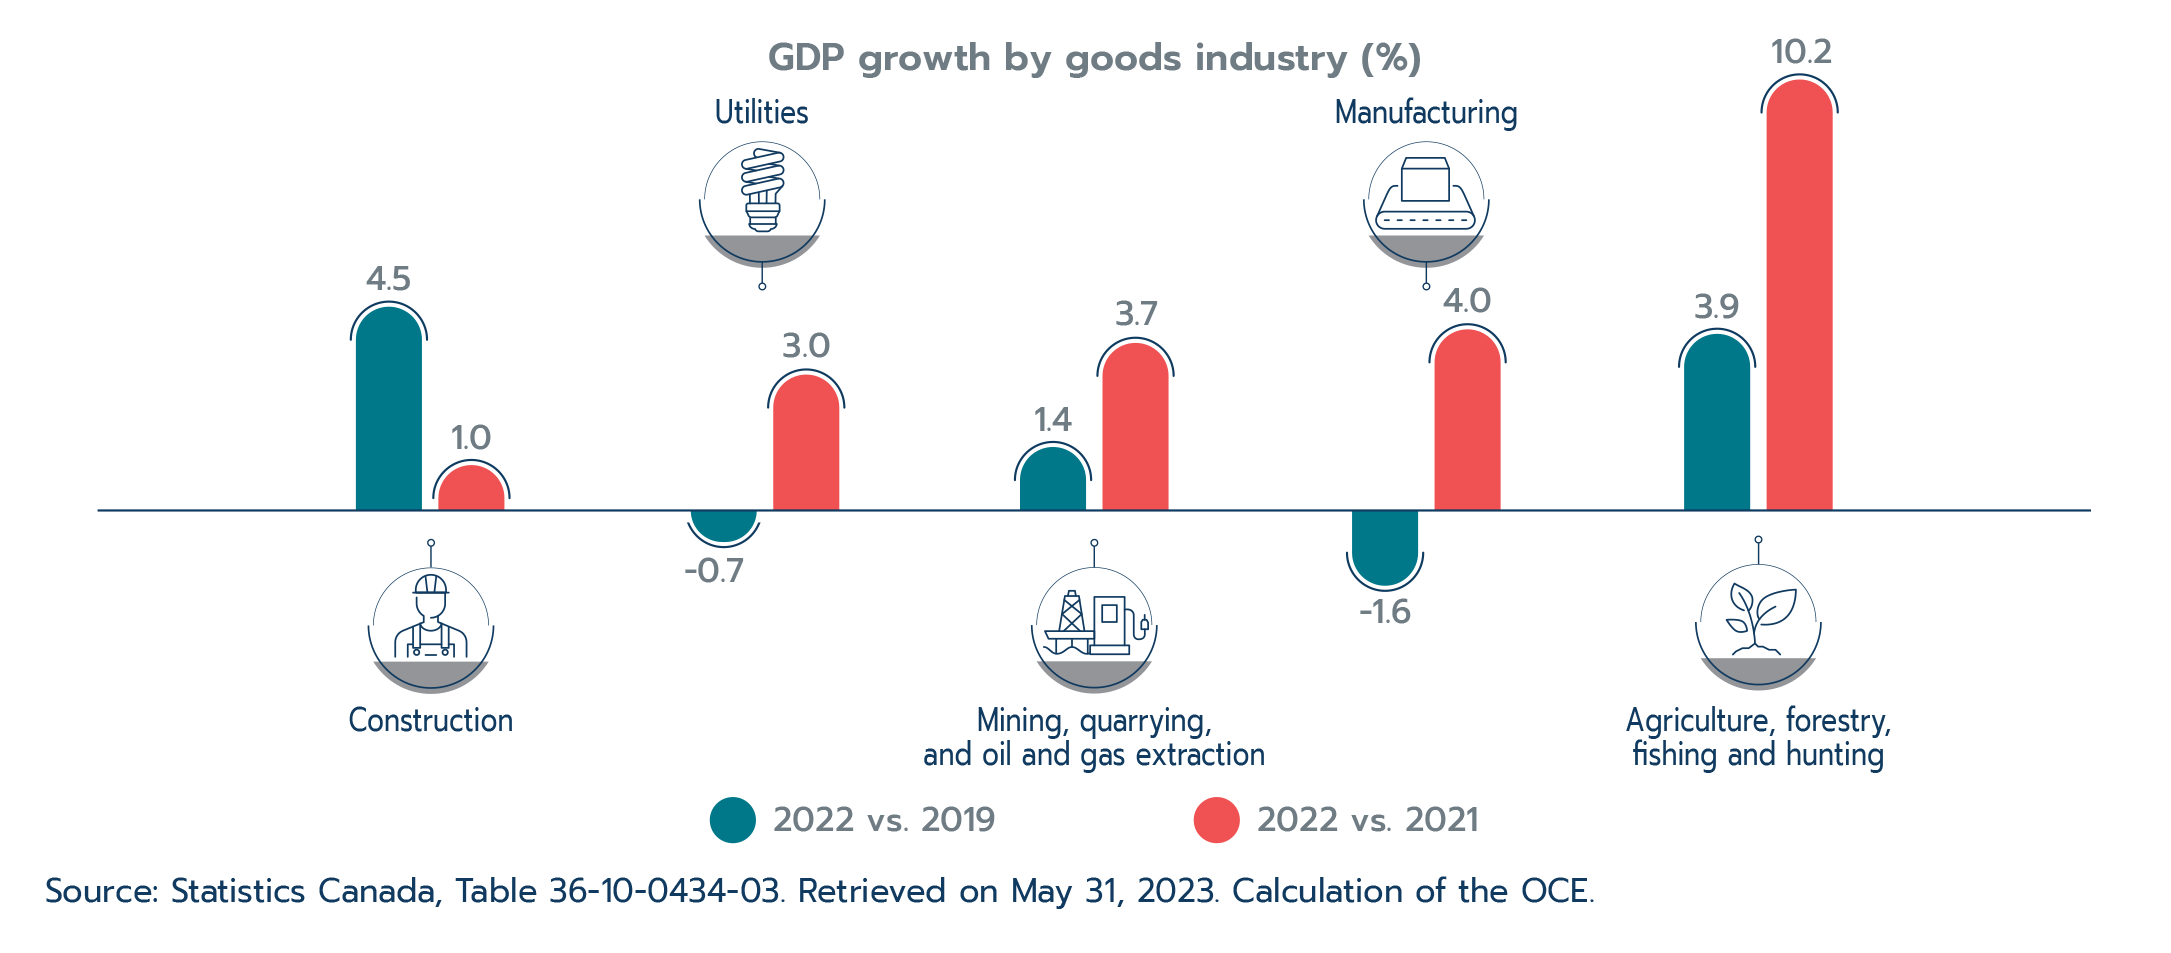 Figure 1.4: All goods sectors expanded in 2022, but manufacturing and utilities have yet to recover to their pre-pandemic levels